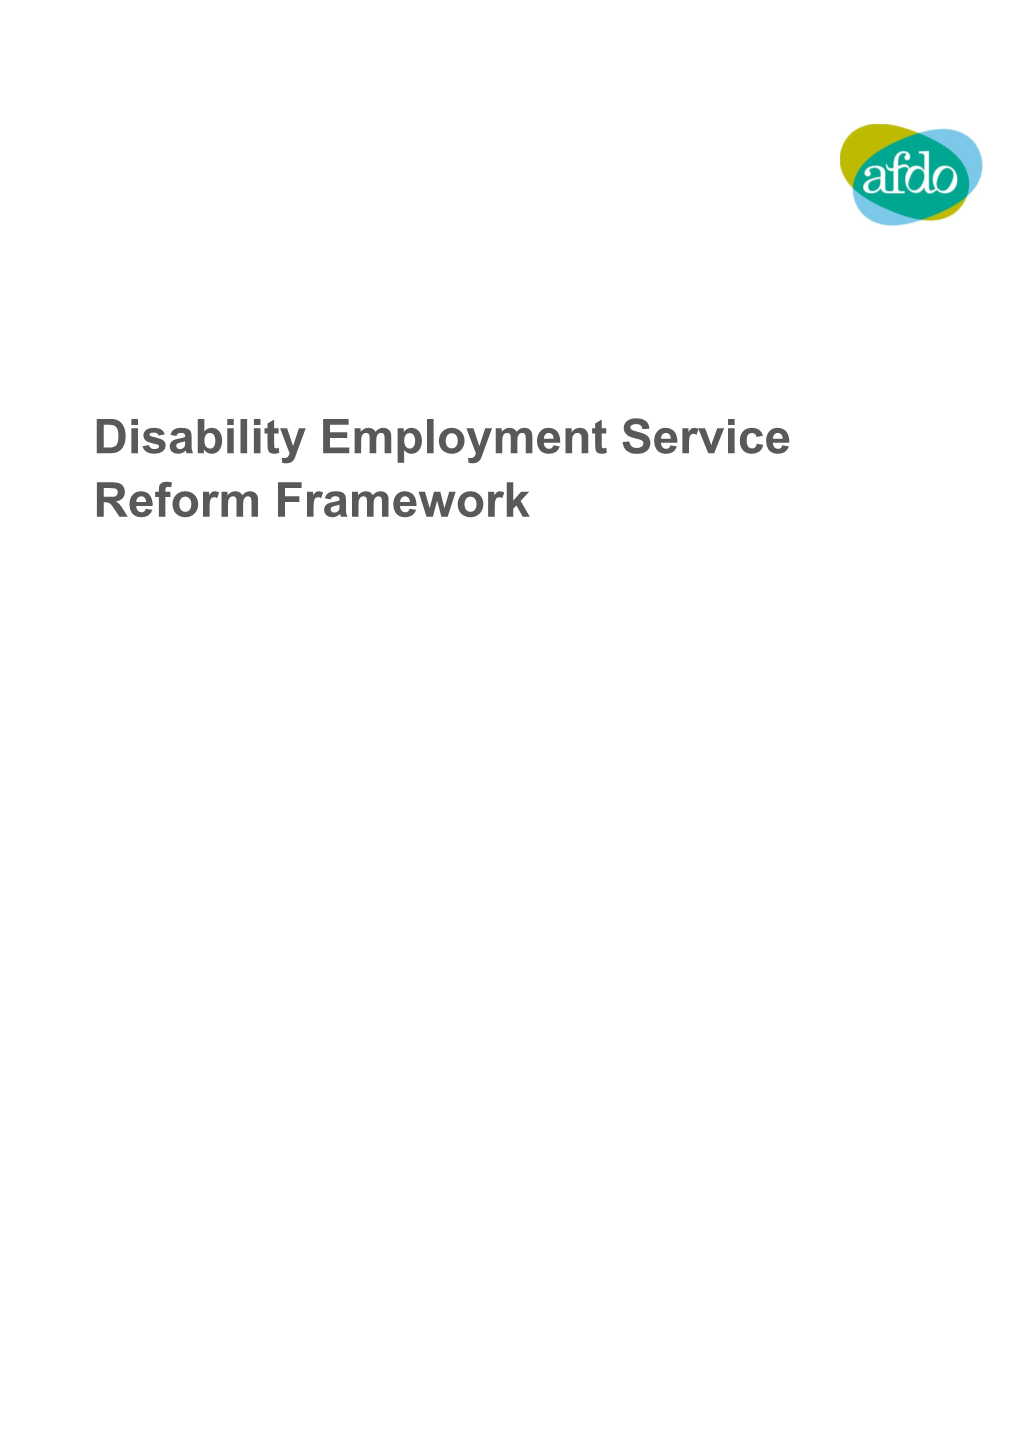 About the Australian Federation of Disability Organisations